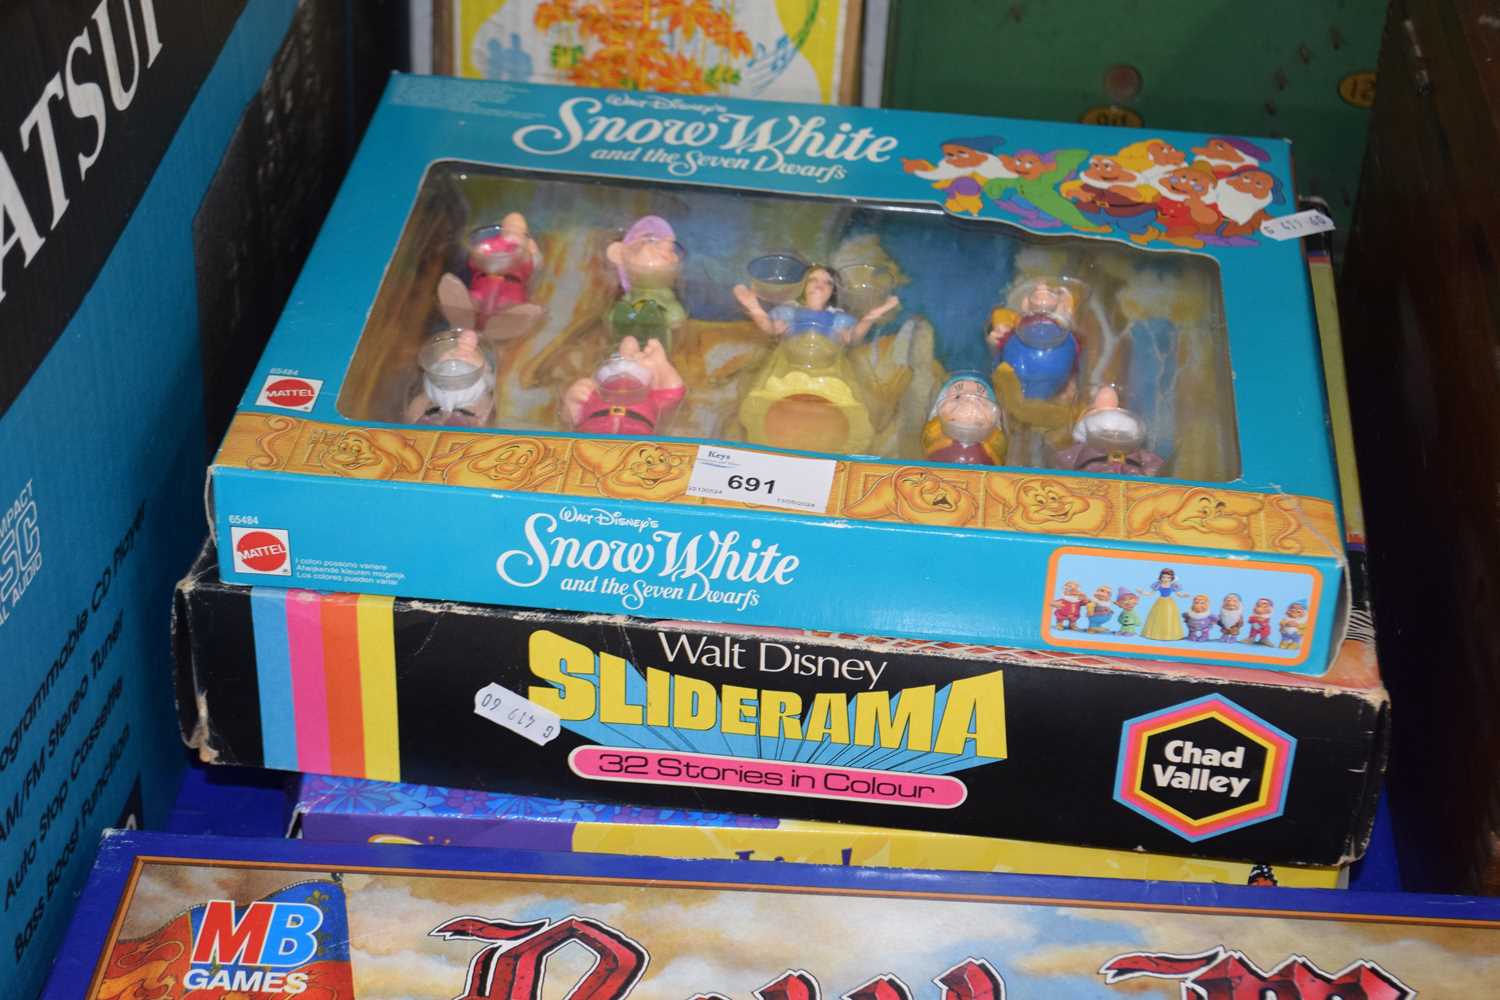 Snow White and the Seven Dwarfs figurines, boxed together with Walt Disney Sliderama and a butterfly